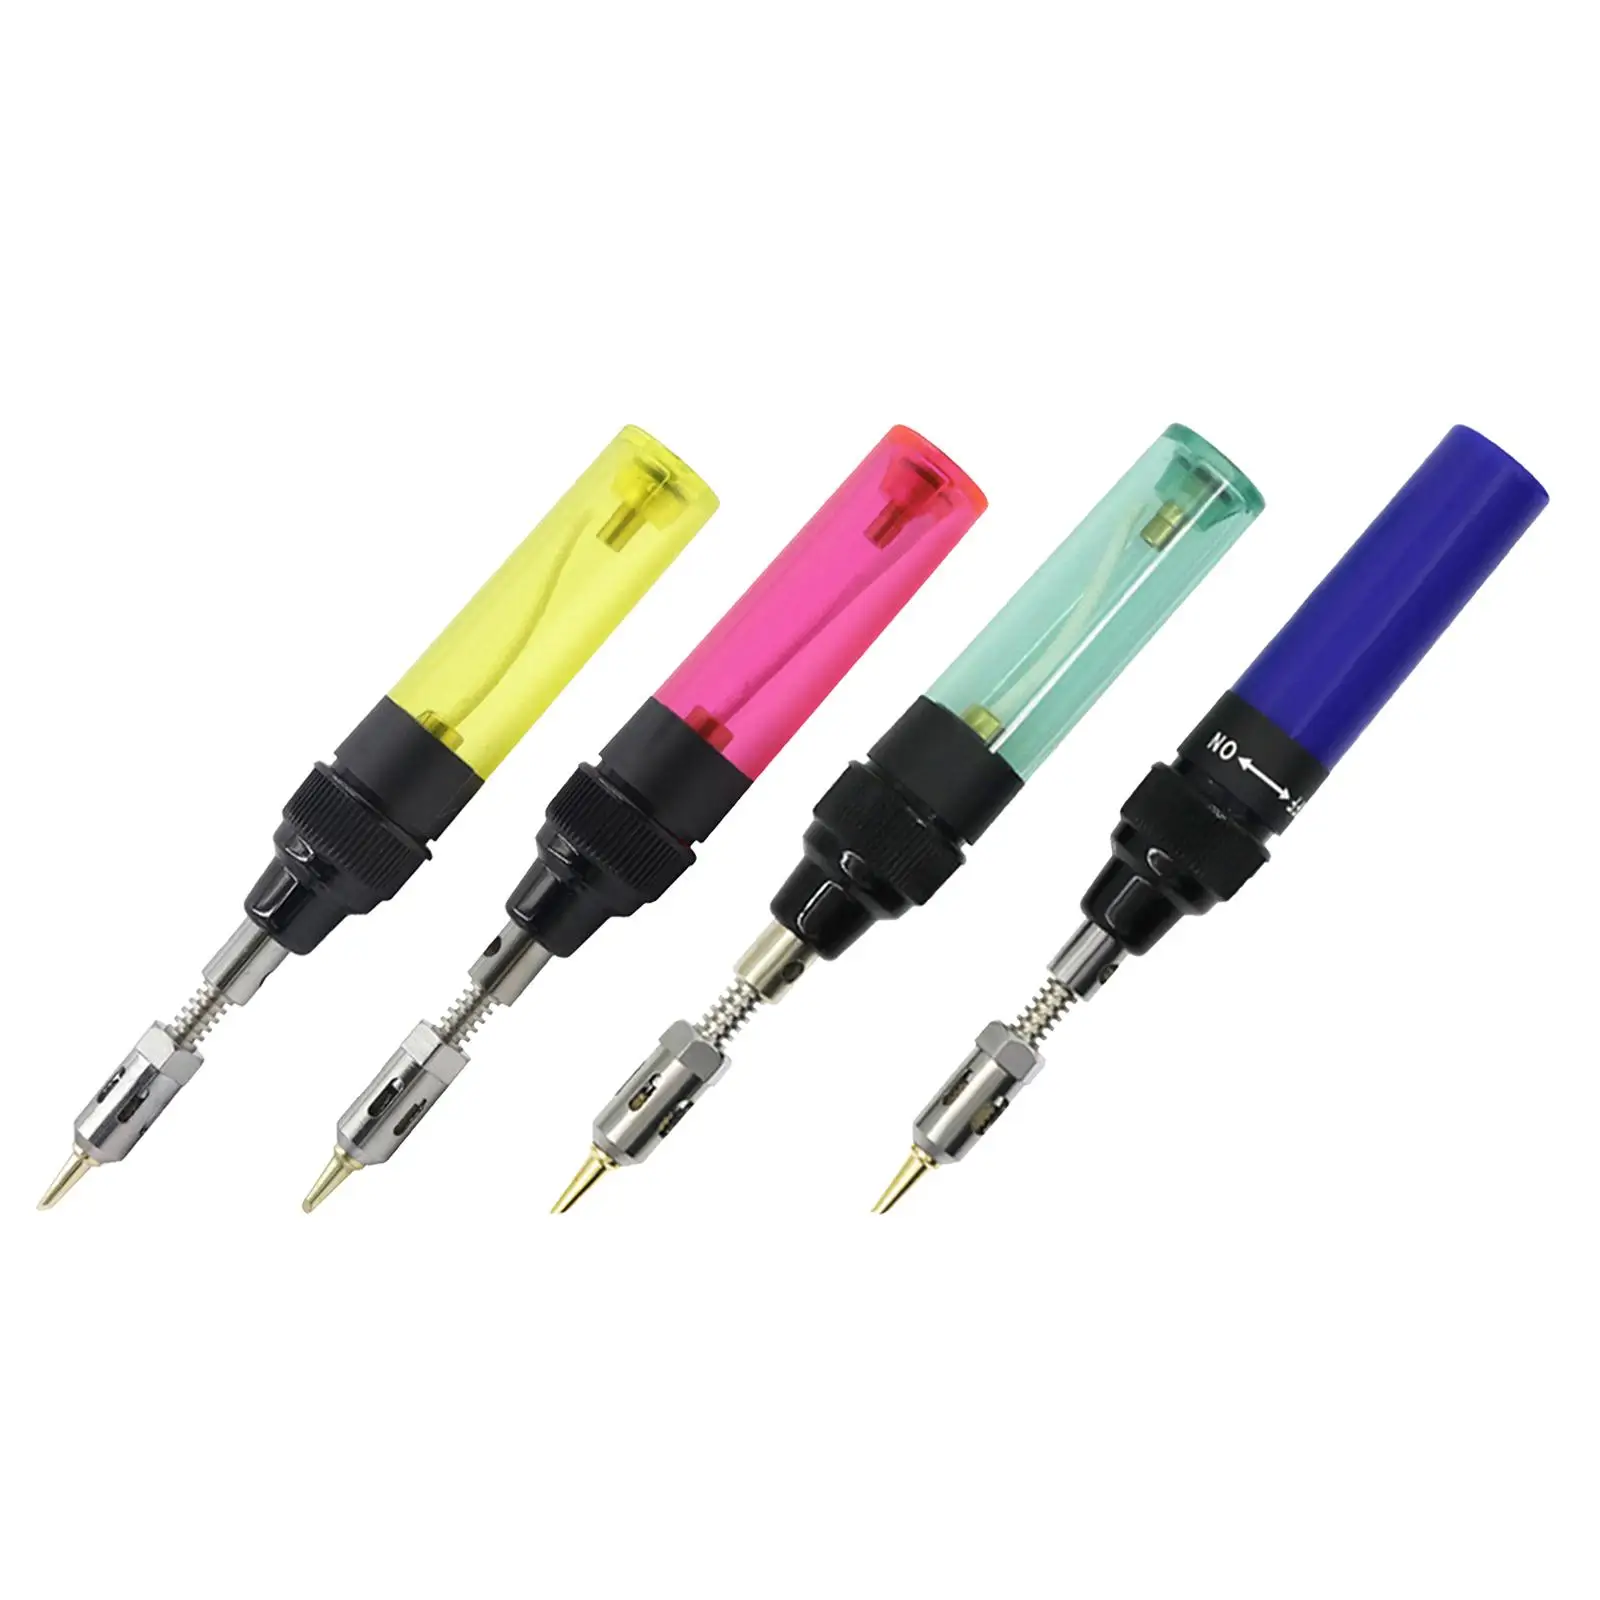 3 in 1 Gas Soldering Solder Iron Welding Torch, Easy to Refill, Soldering Iron